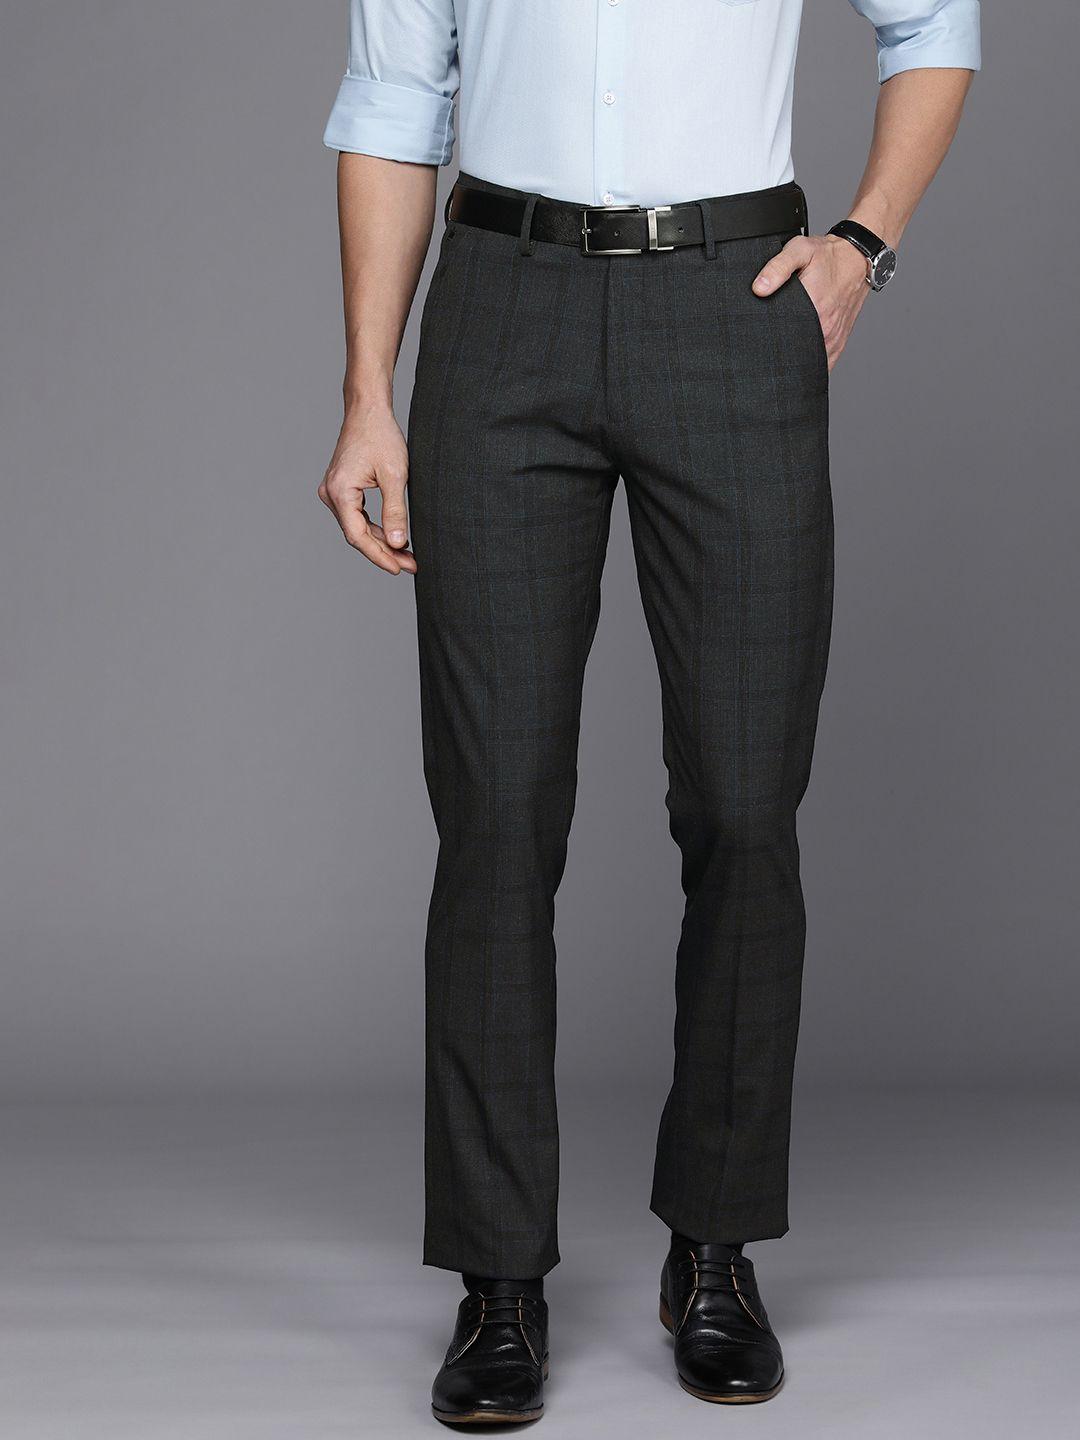 louis philippe men charcoal grey self-checked slim fit trousers